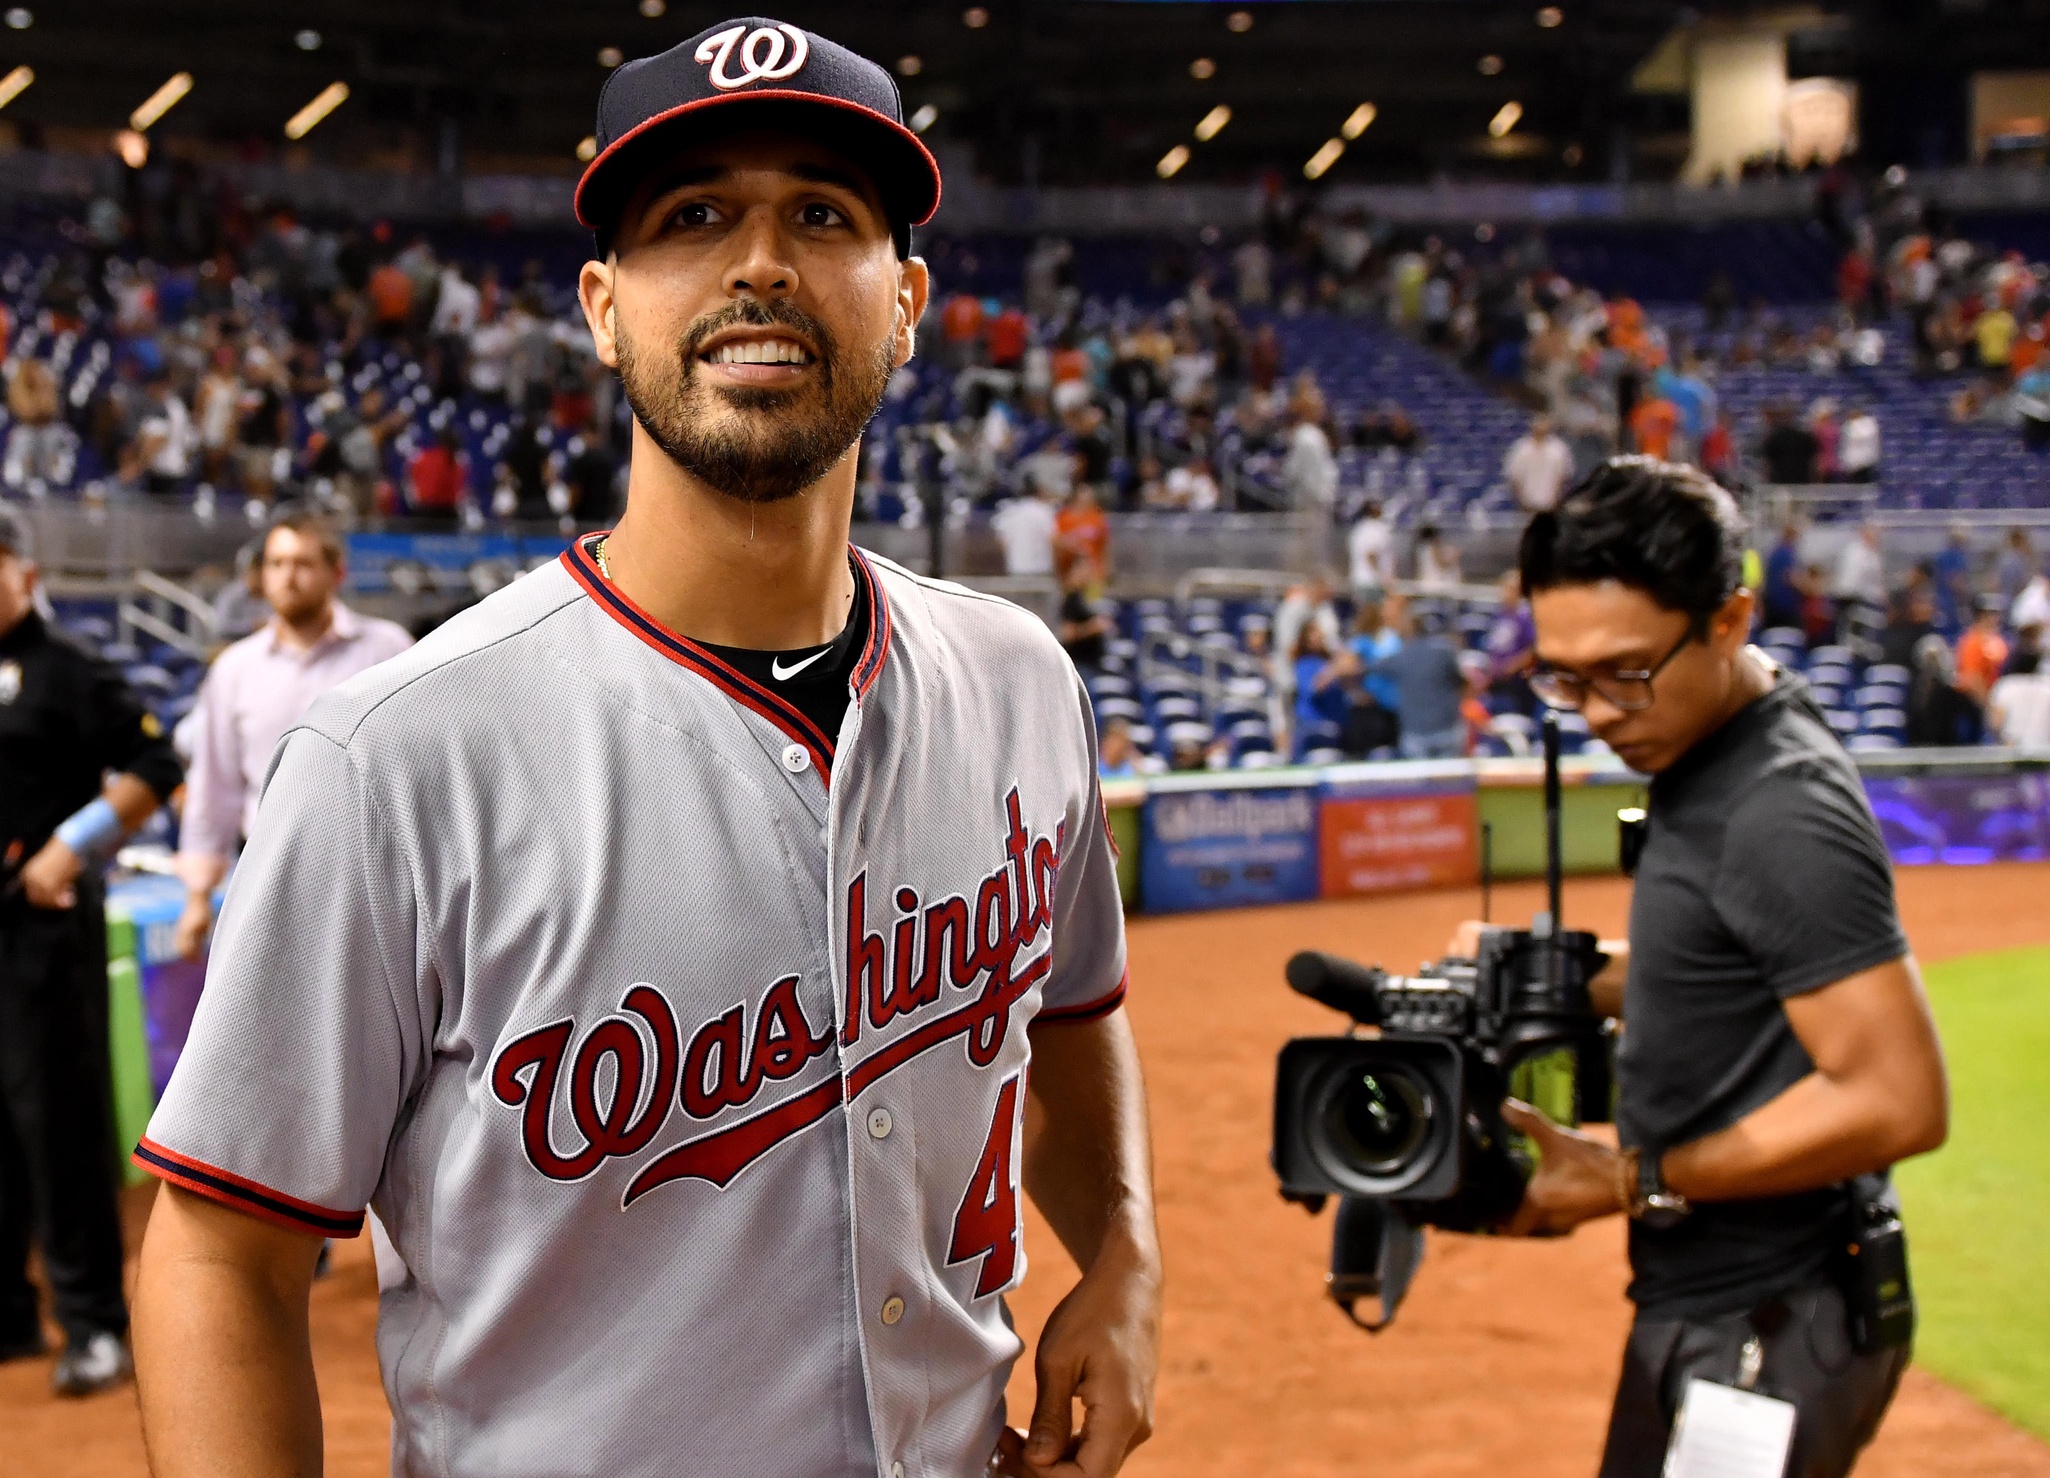 Gio Gonzalez should be considered an ace-type pitcher.